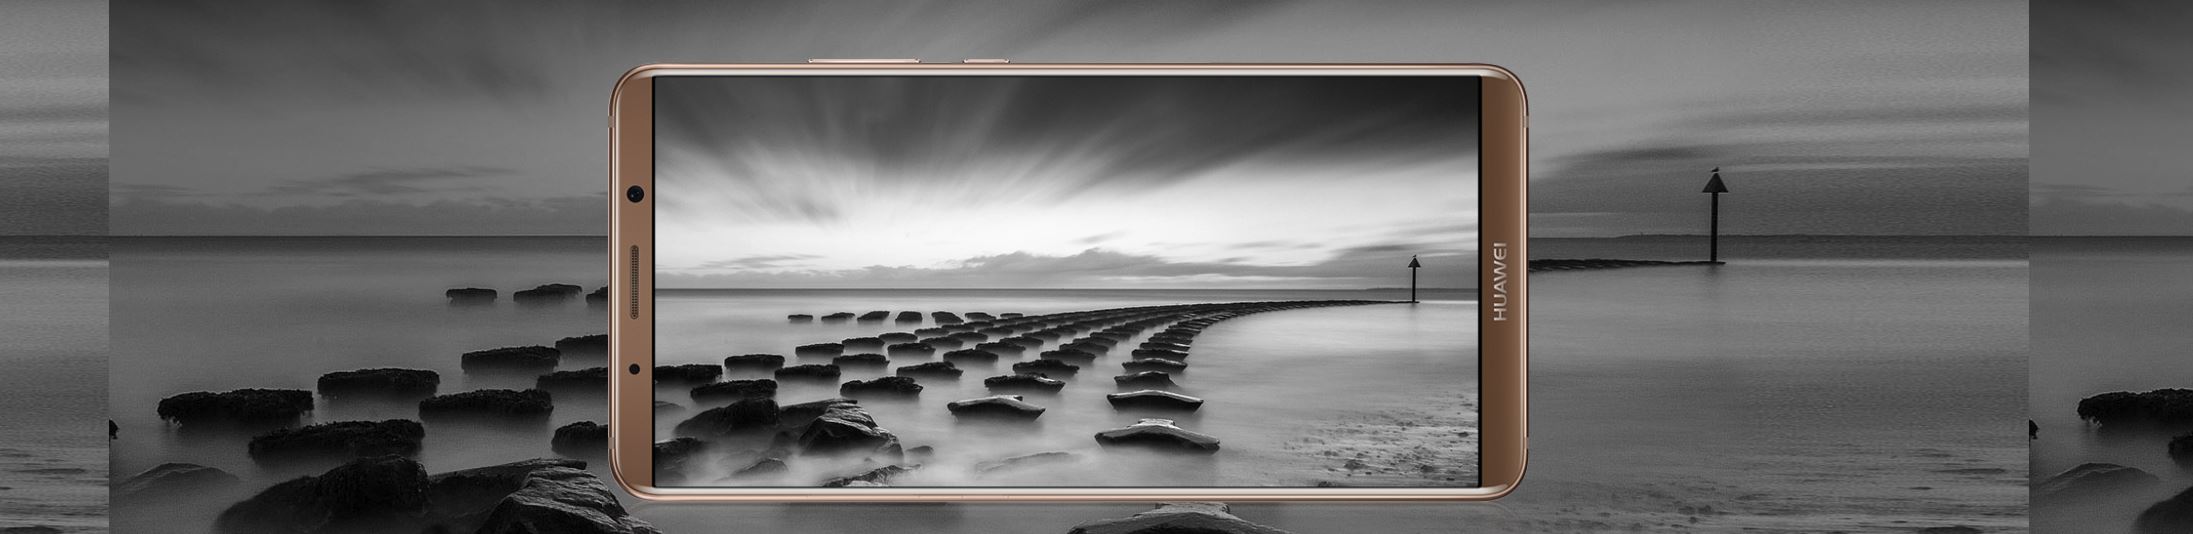 V3 REVIEW: Huawei Mate 10, Ticks All The Right Boxes, Real Value Device